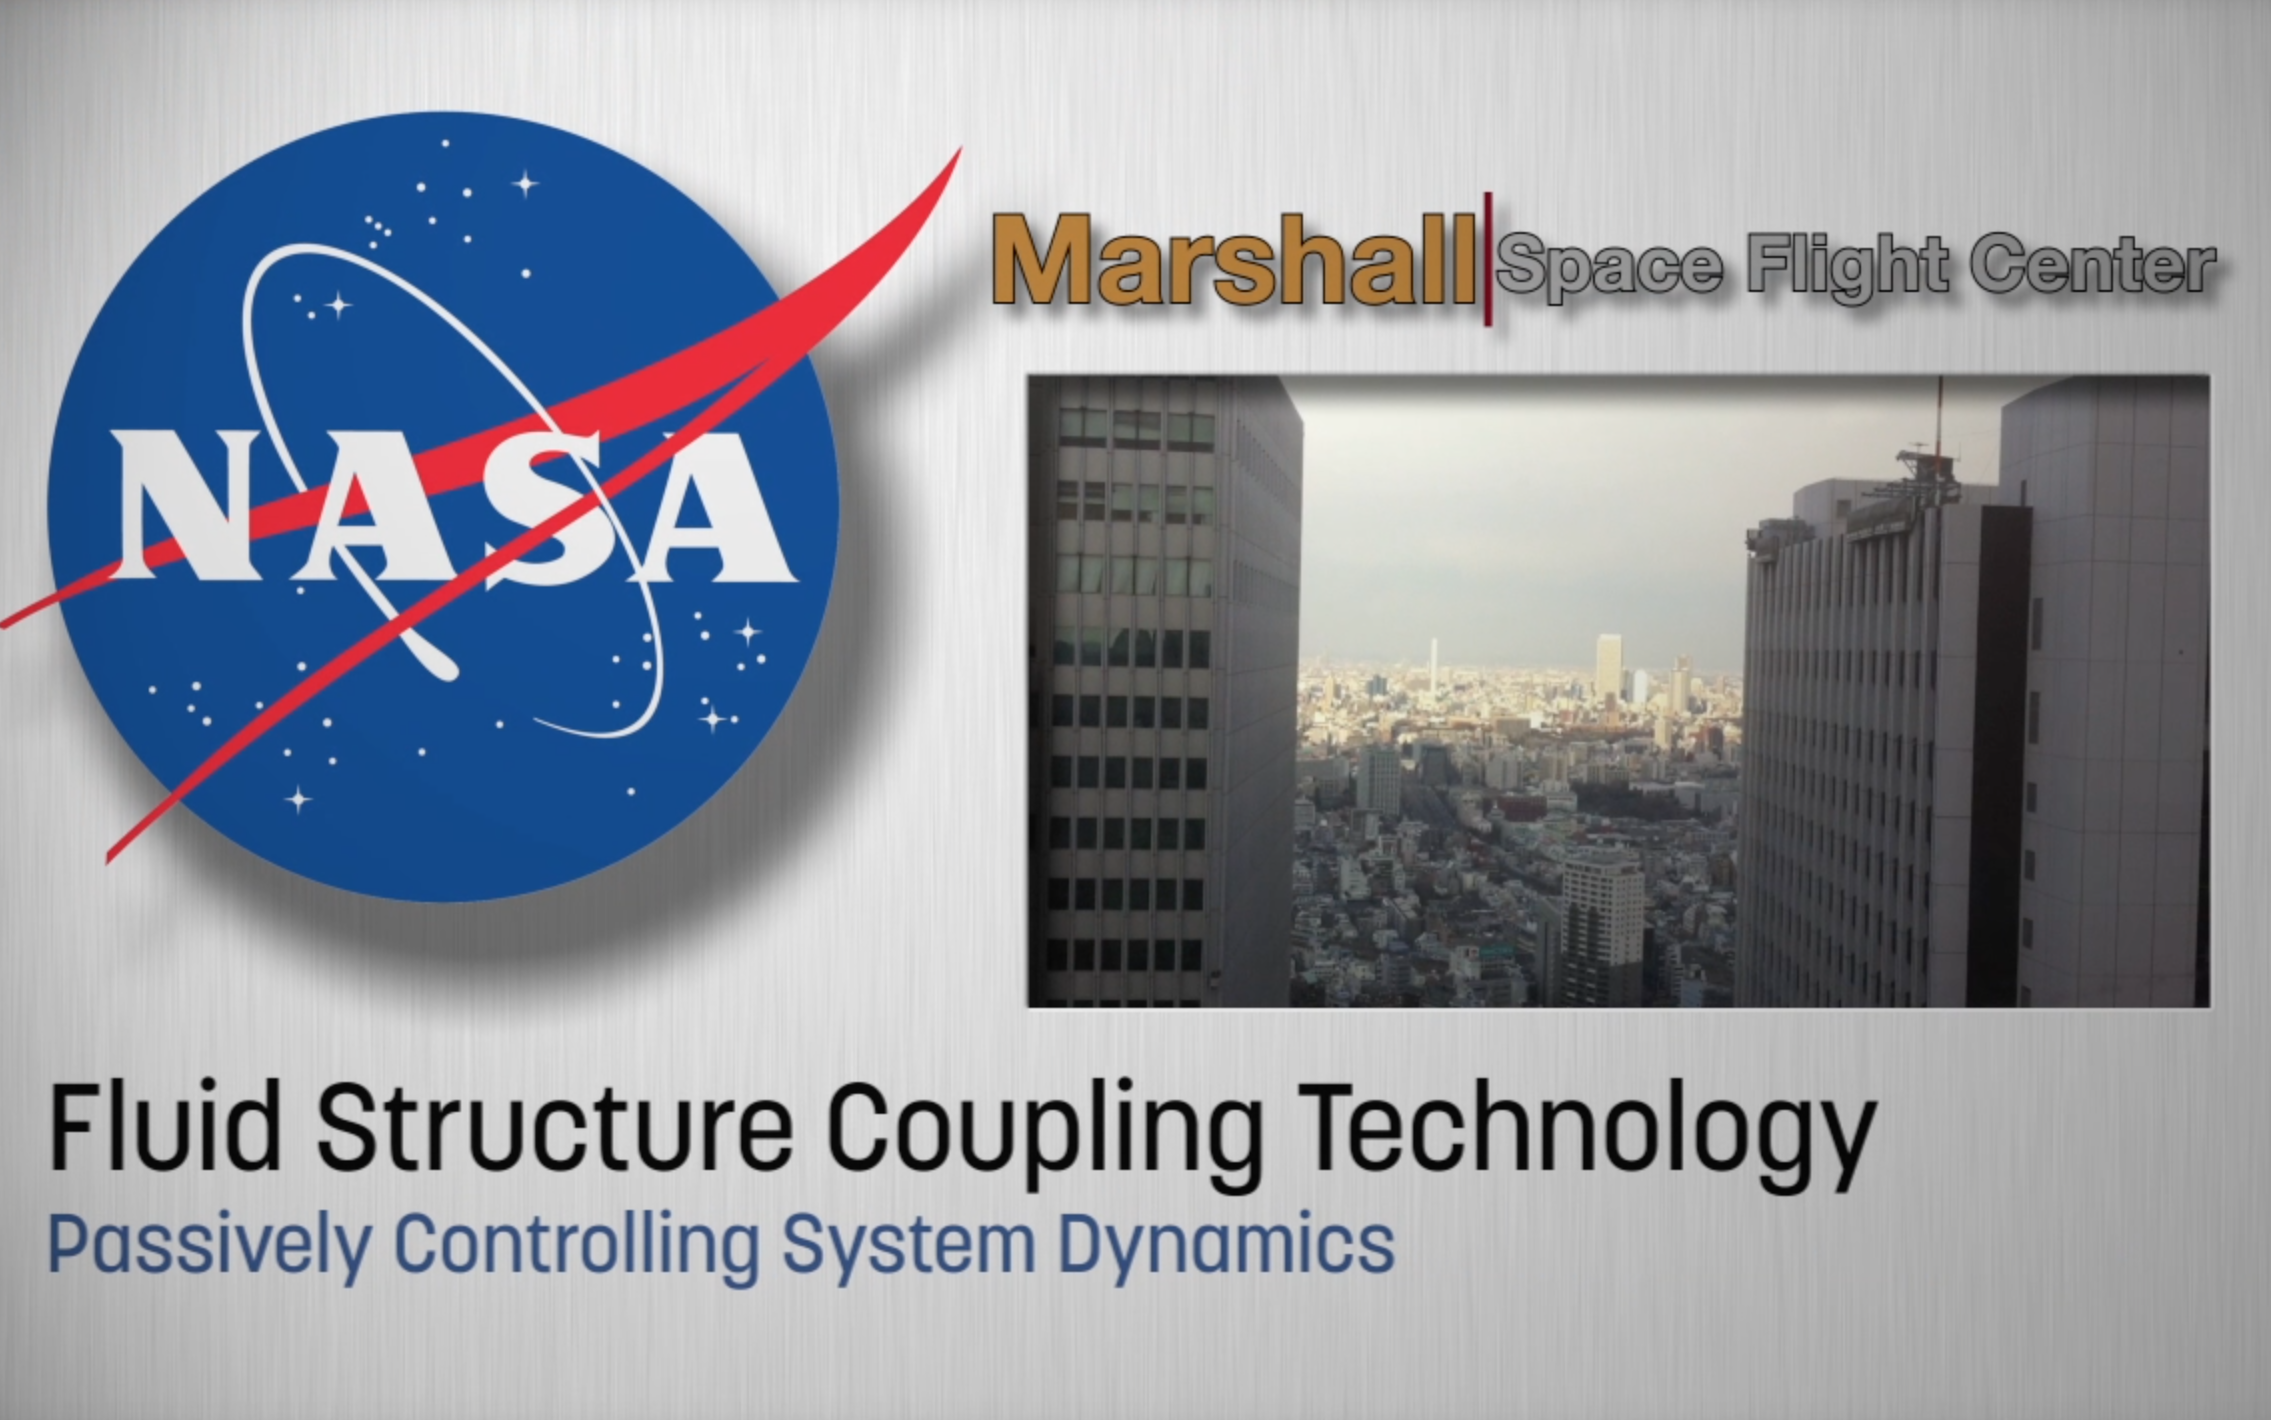 NASA’s Fluid Structure Coupling Technology?